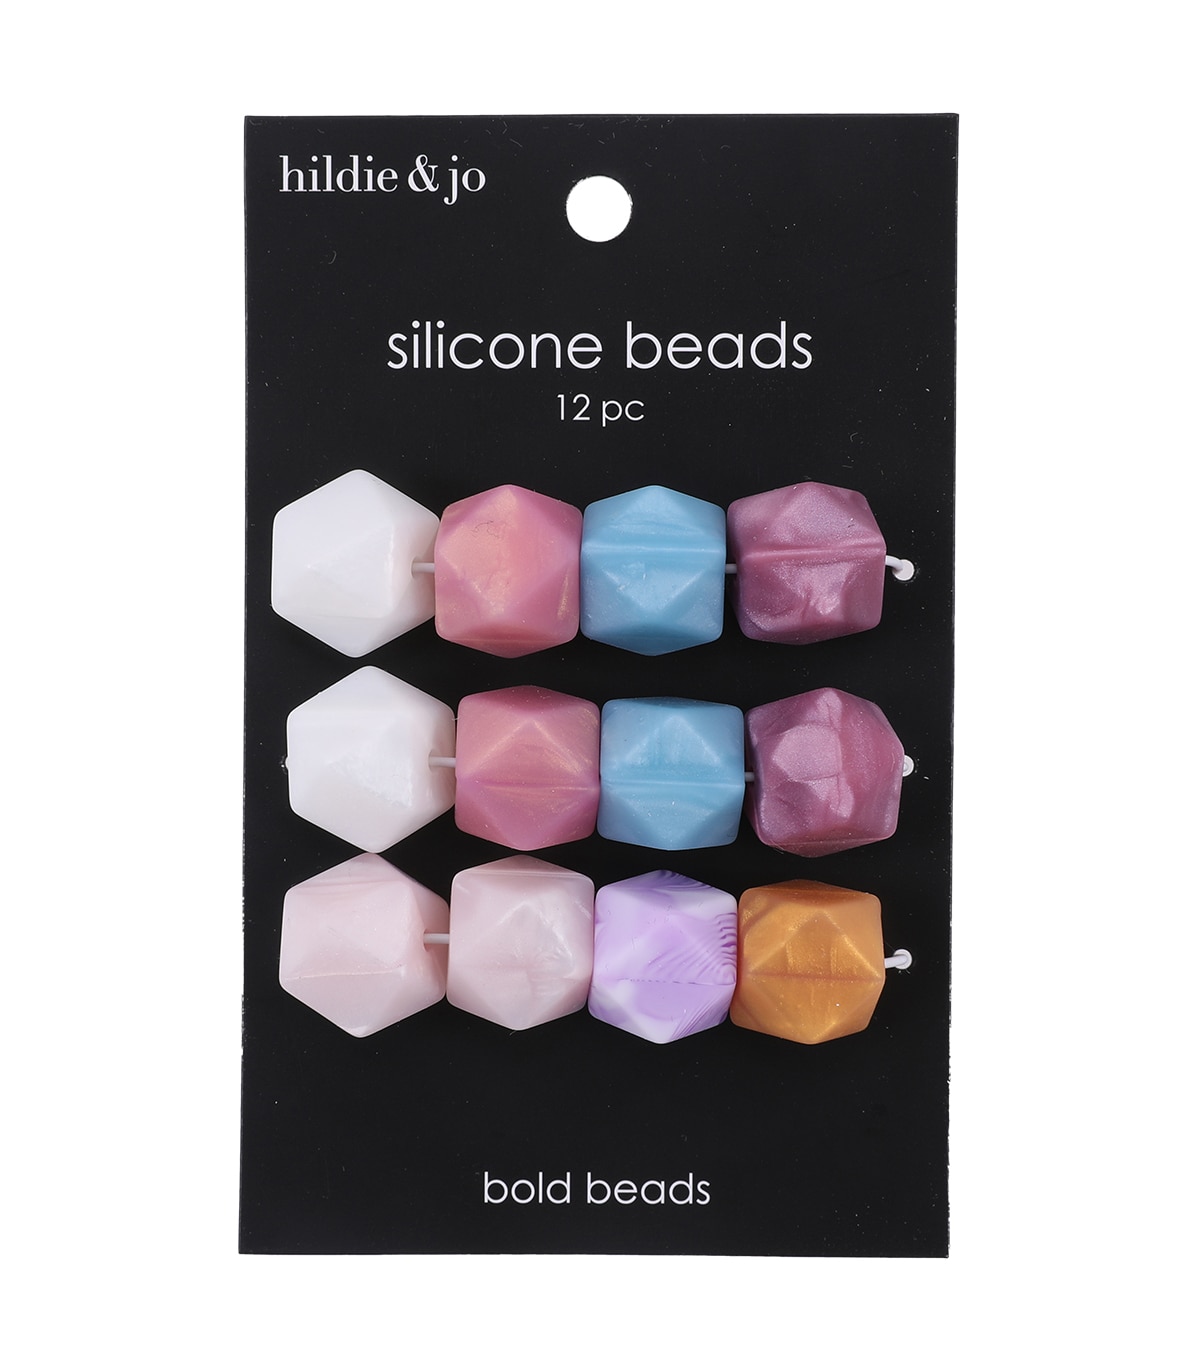 14mm Pearlized Square Silicone Beads by hildie & jo 12pc | JOANN